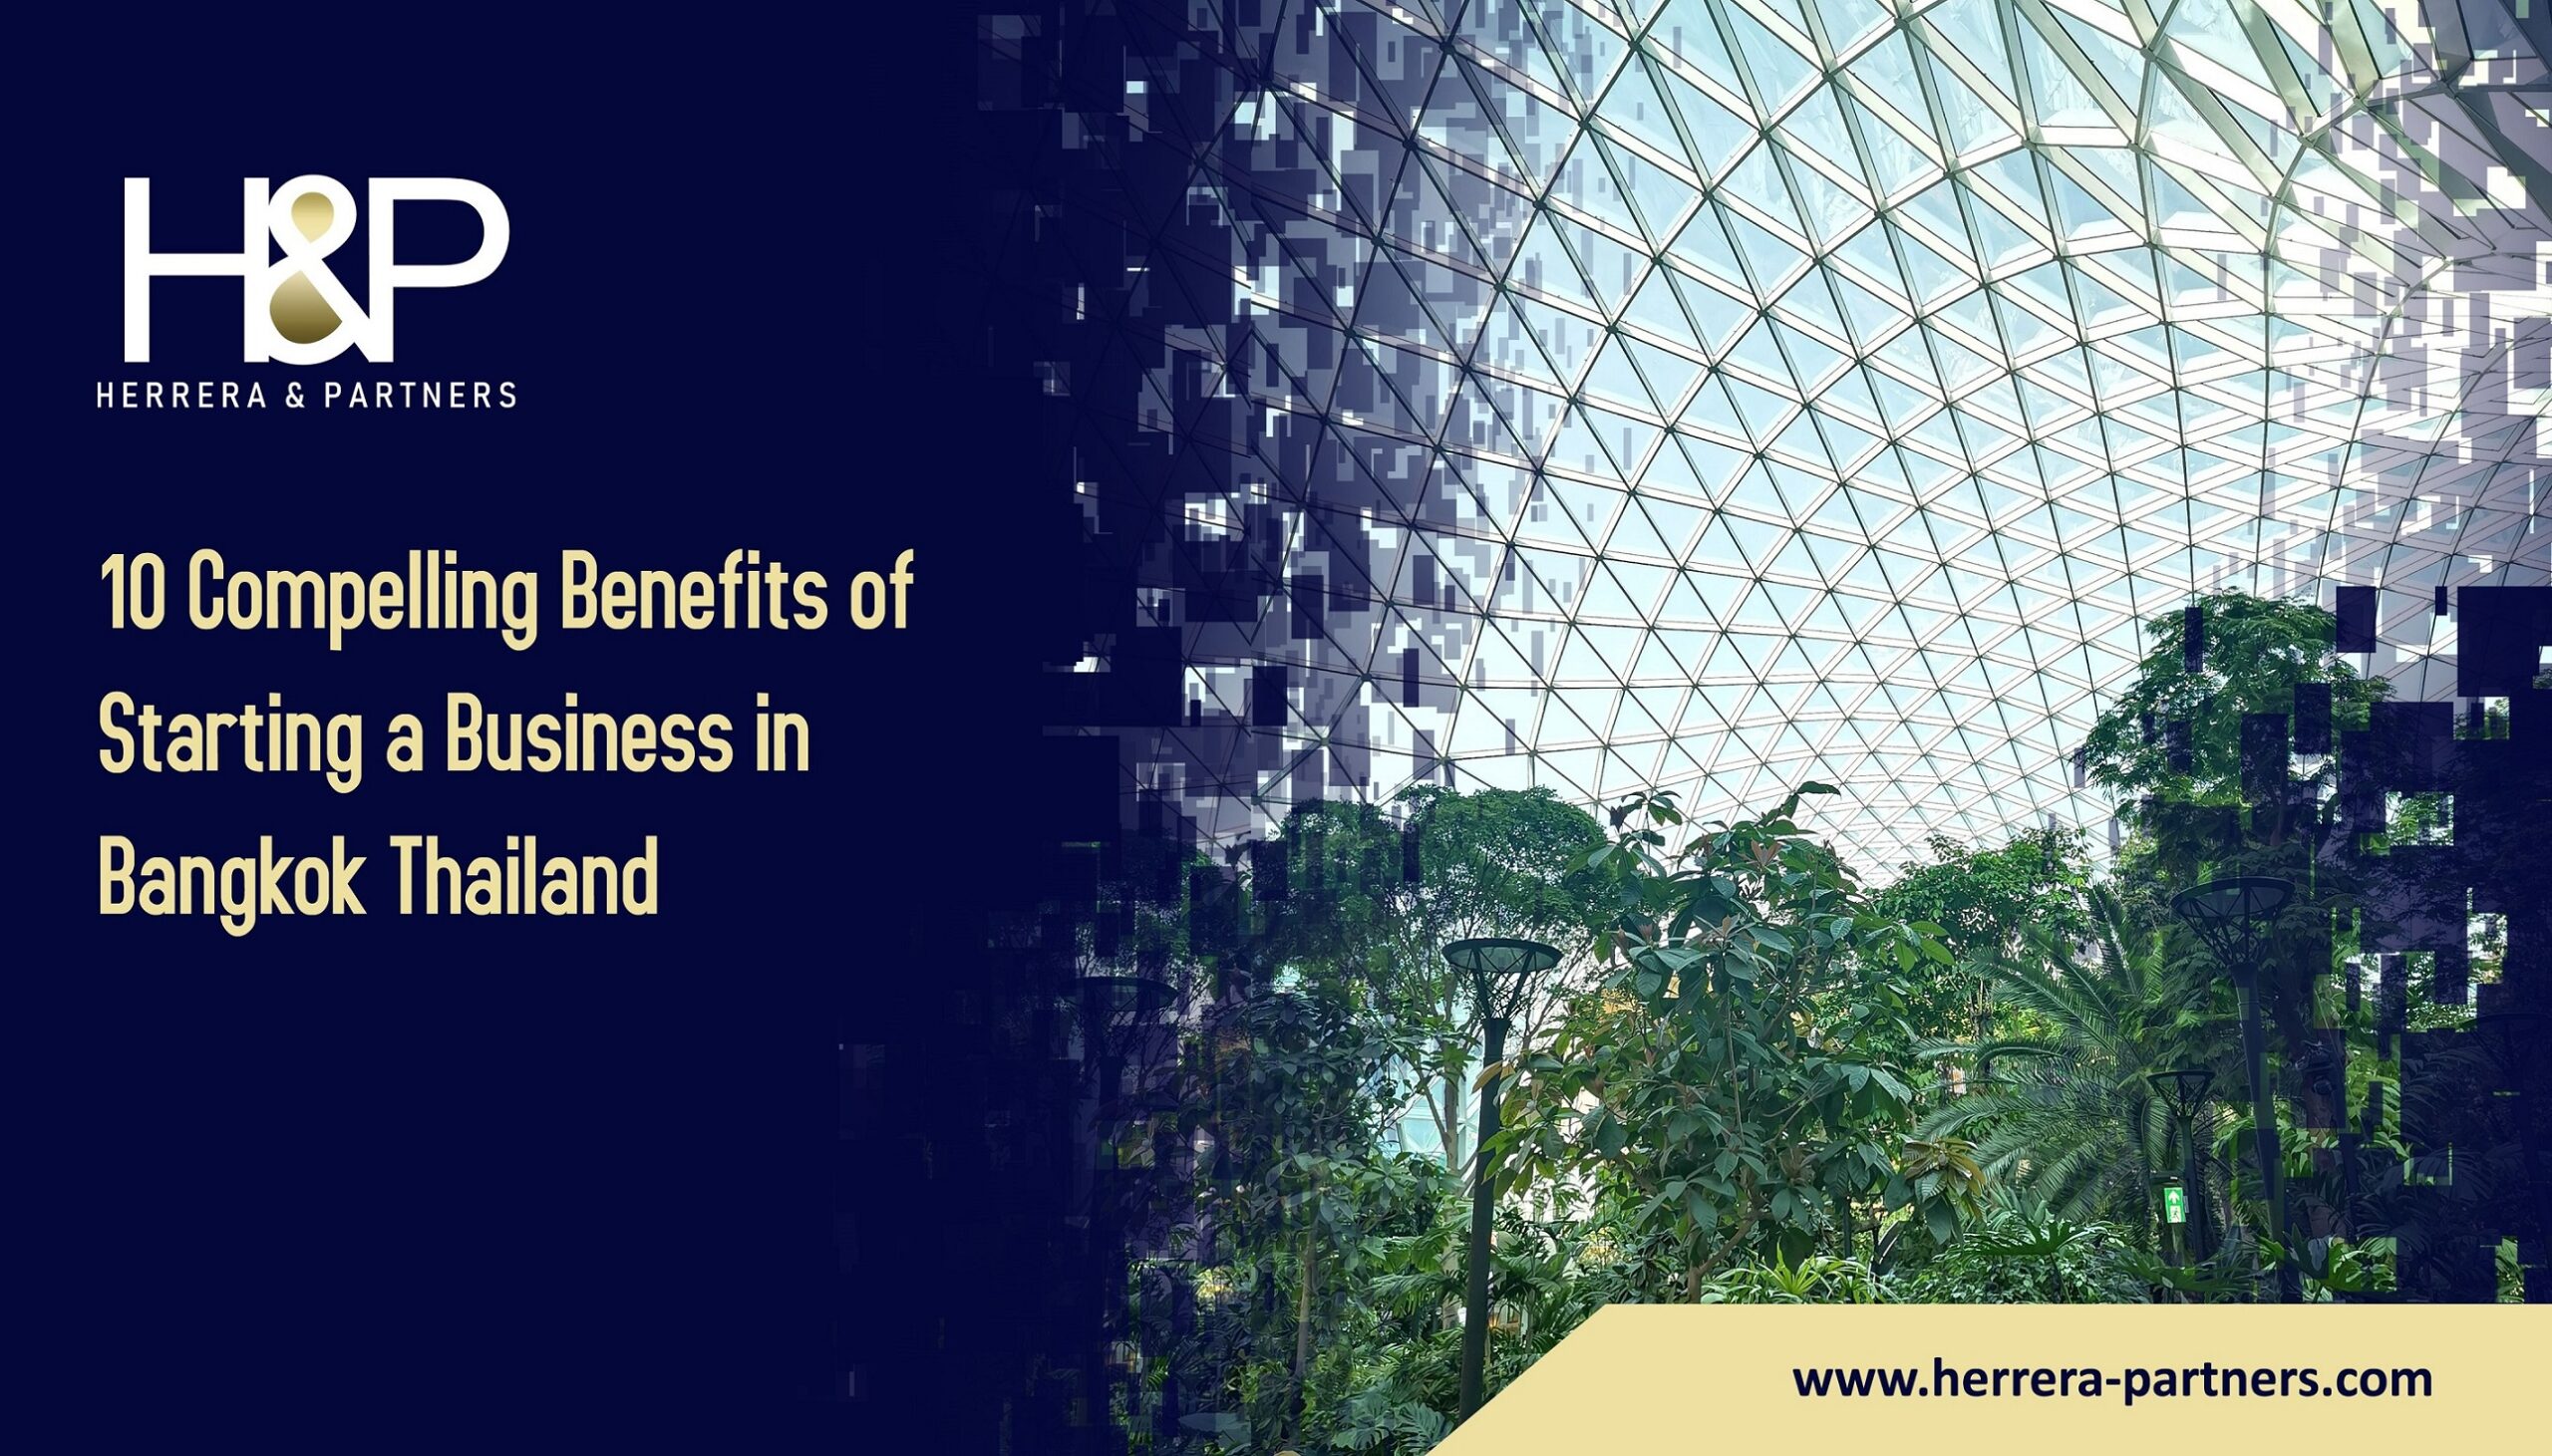 10 Compelling Benefits of Starting a Business in Bangkok Thailand H&P Law firm in Thailand